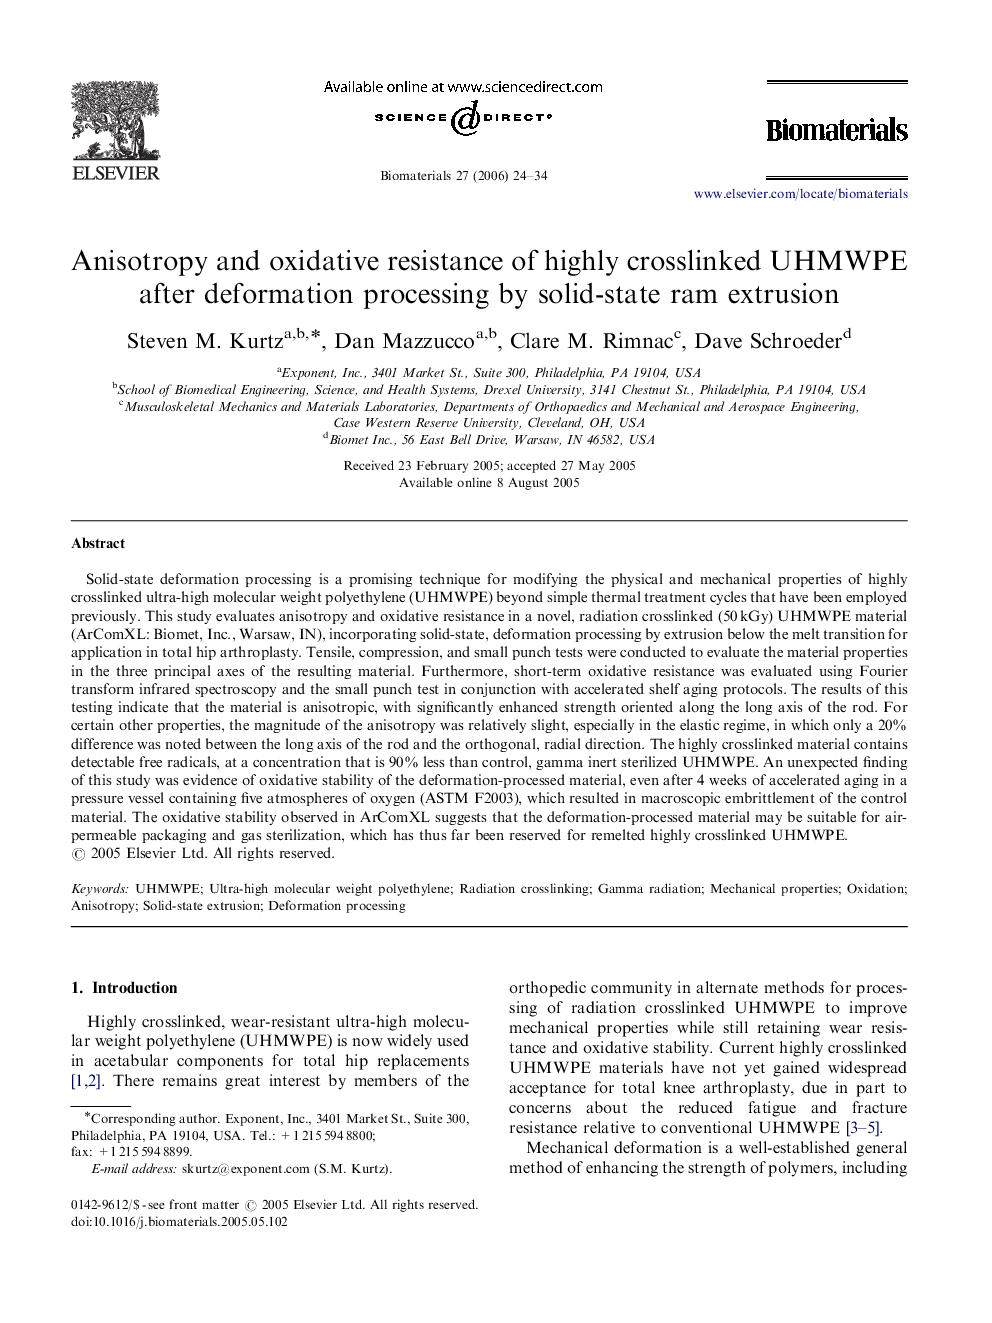 Anisotropy and oxidative resistance of highly crosslinked UHMWPE after deformation processing by solid-state ram extrusion